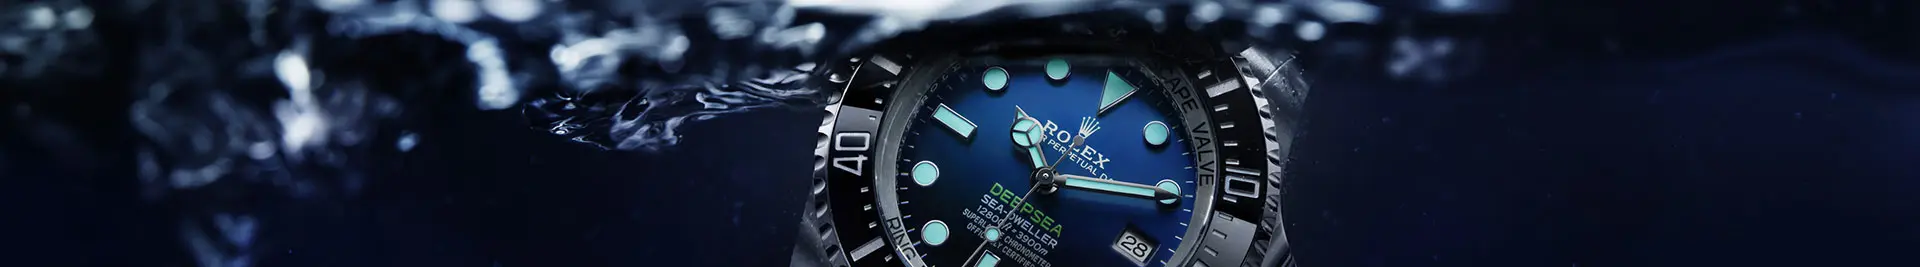 Extreme divers’ watches